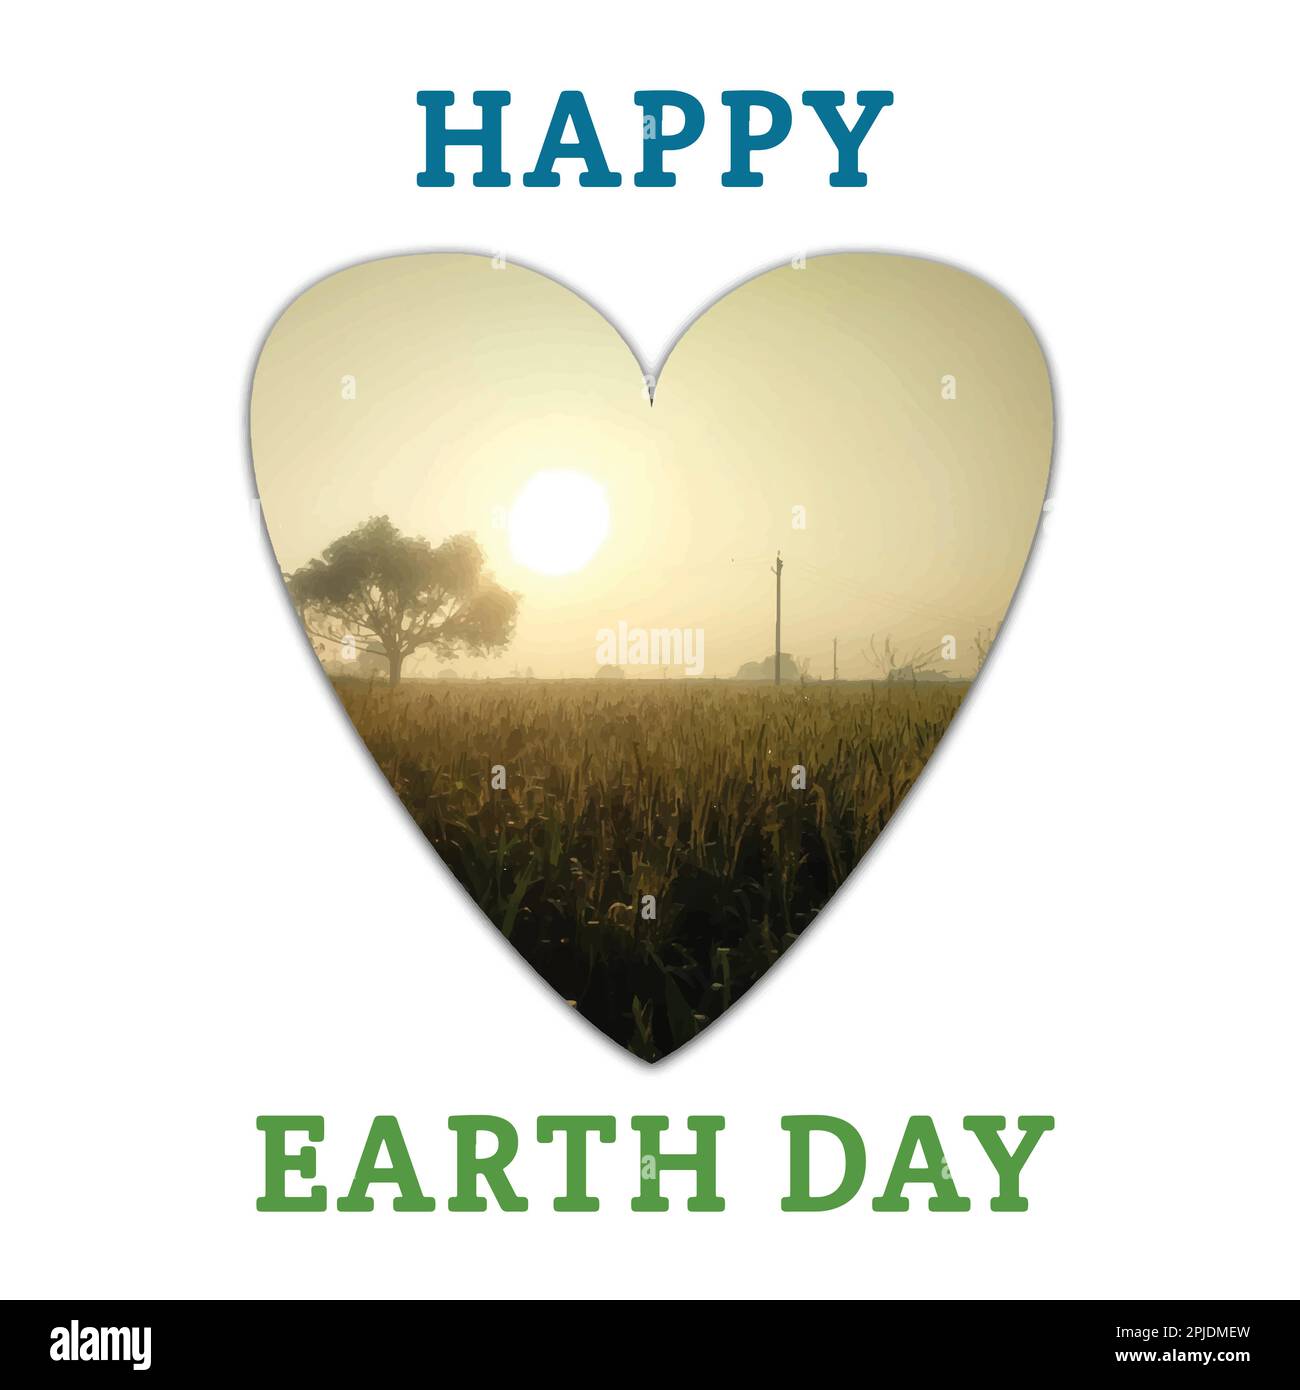 Happy Earth Day concept with heart shape over wheat field and tree. Vector illustration Stock Vector